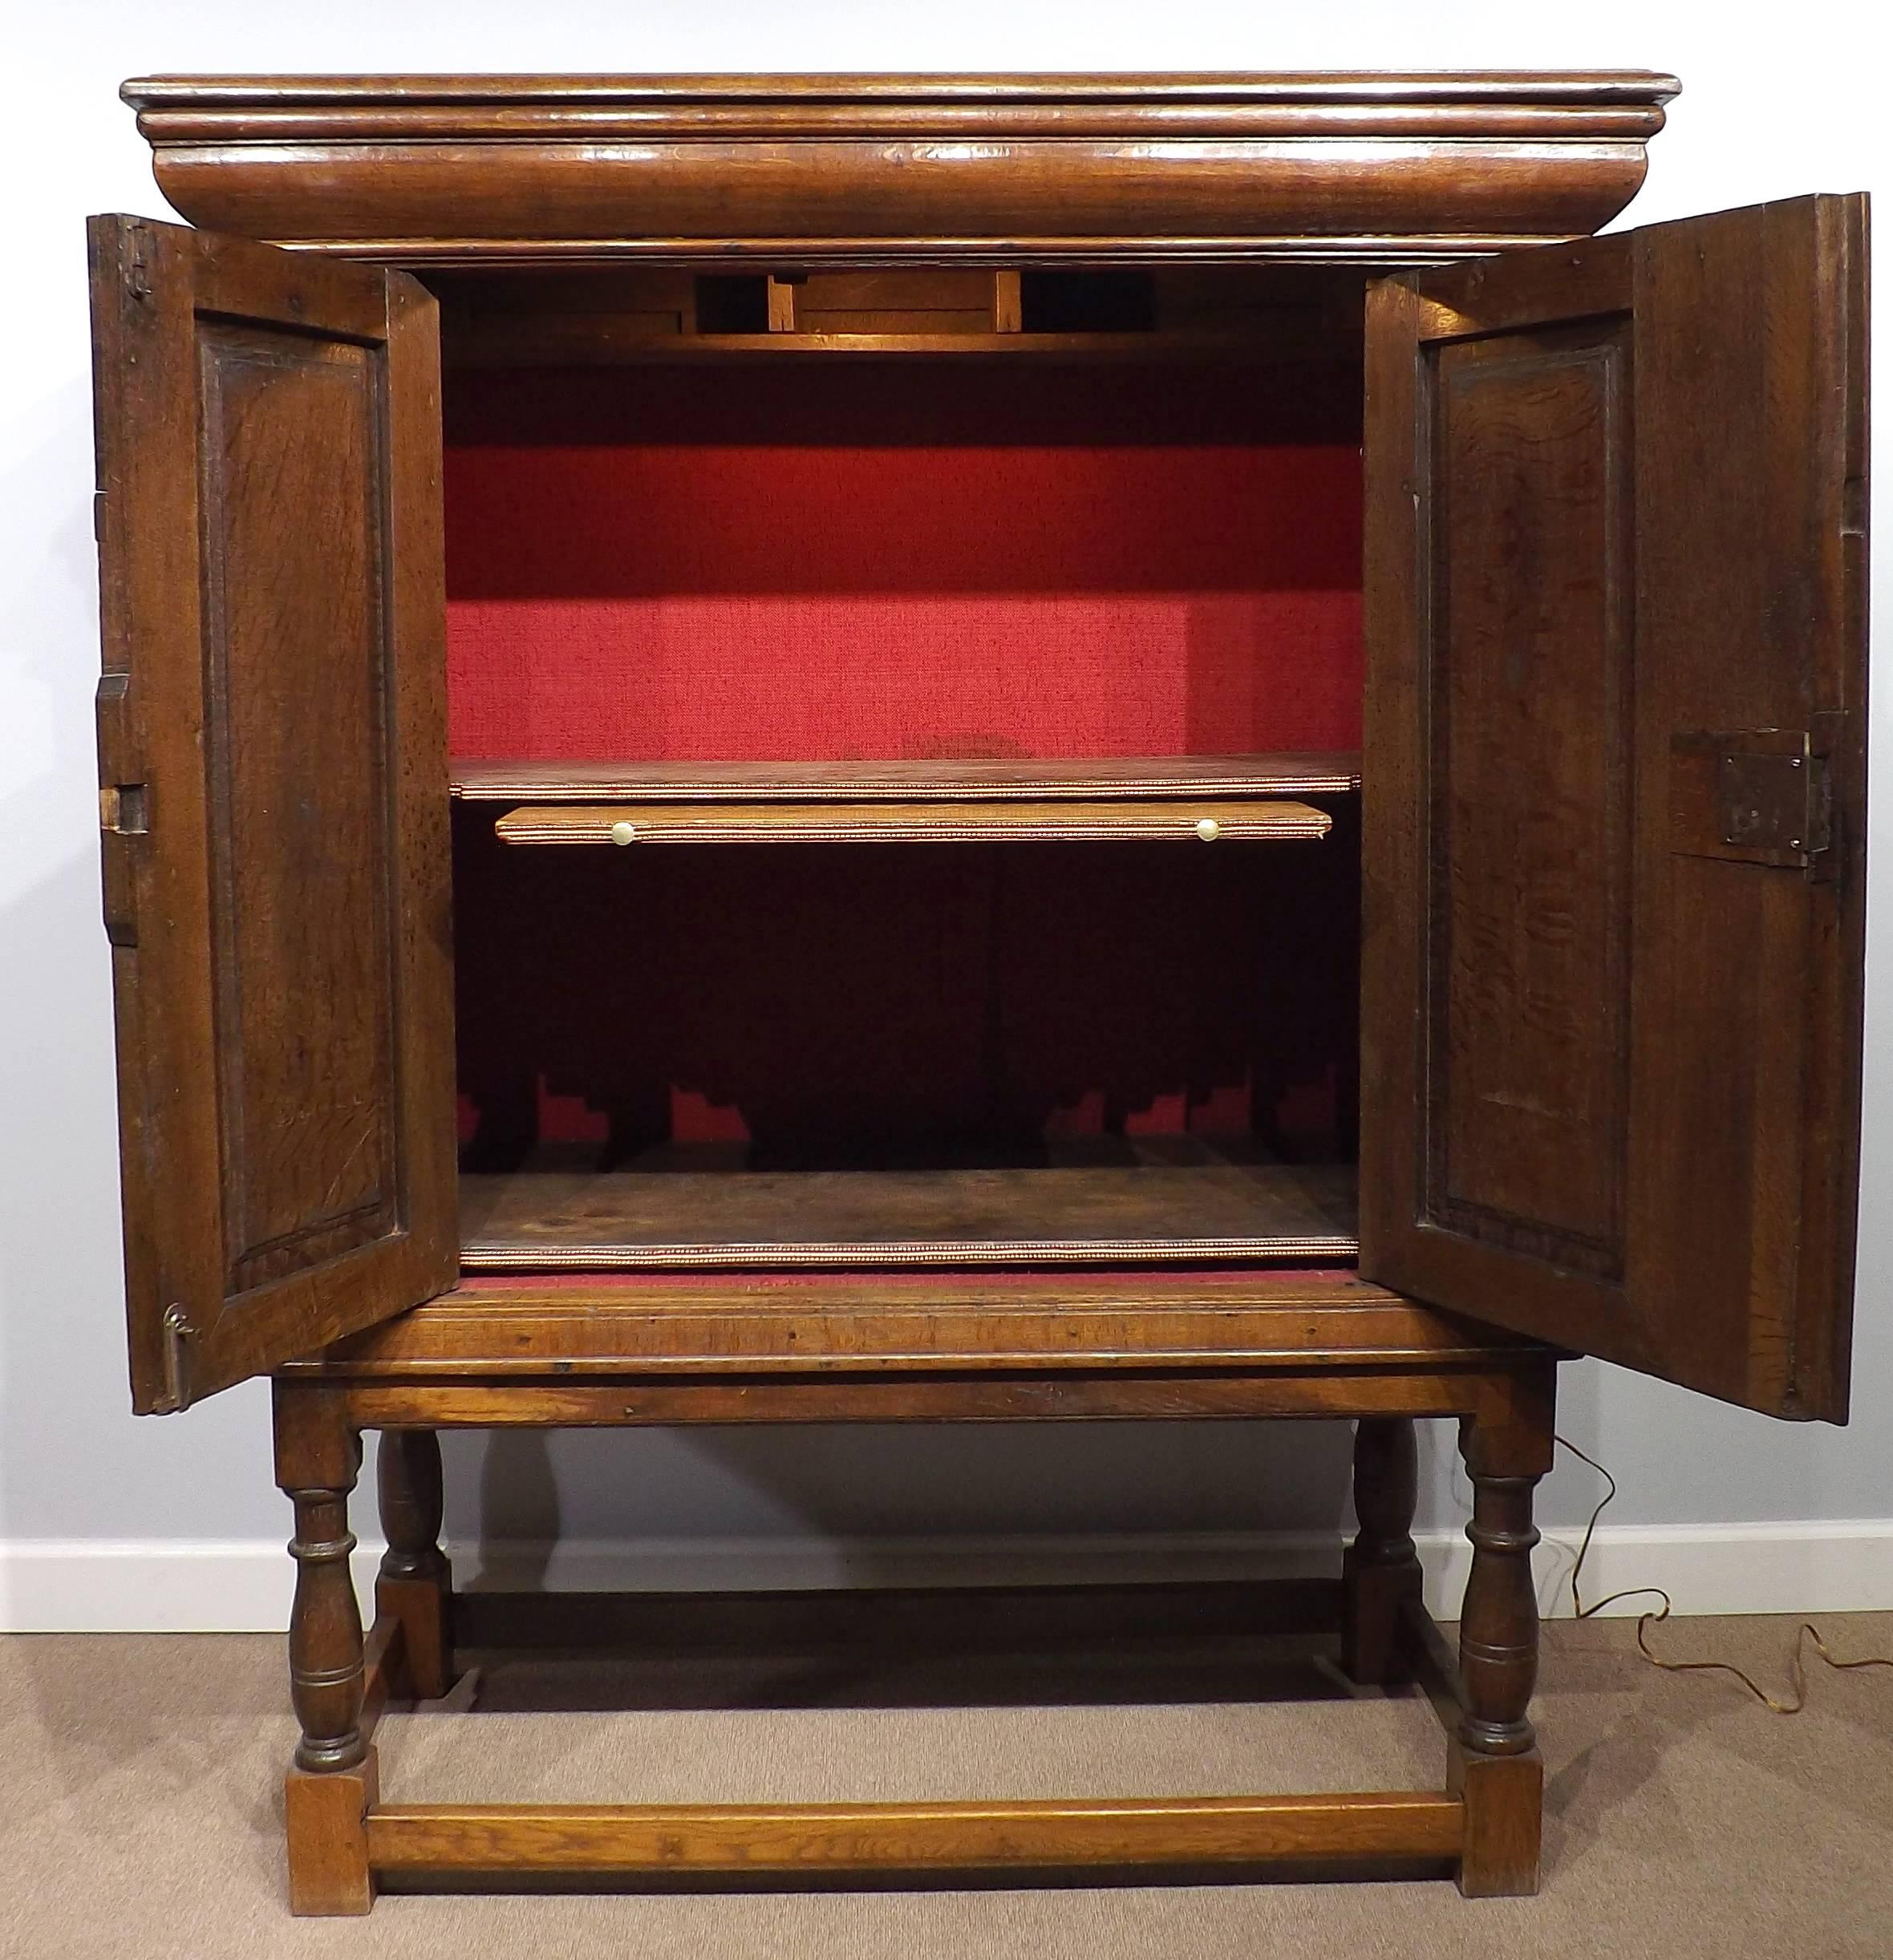 A handsome cabinet dating from the Dutch golden age of the 16th century. Quarter sawn oak construction and in two pieces, the bottom footing has had some light refurbishment to keep the originality of the item. Later updates include interior